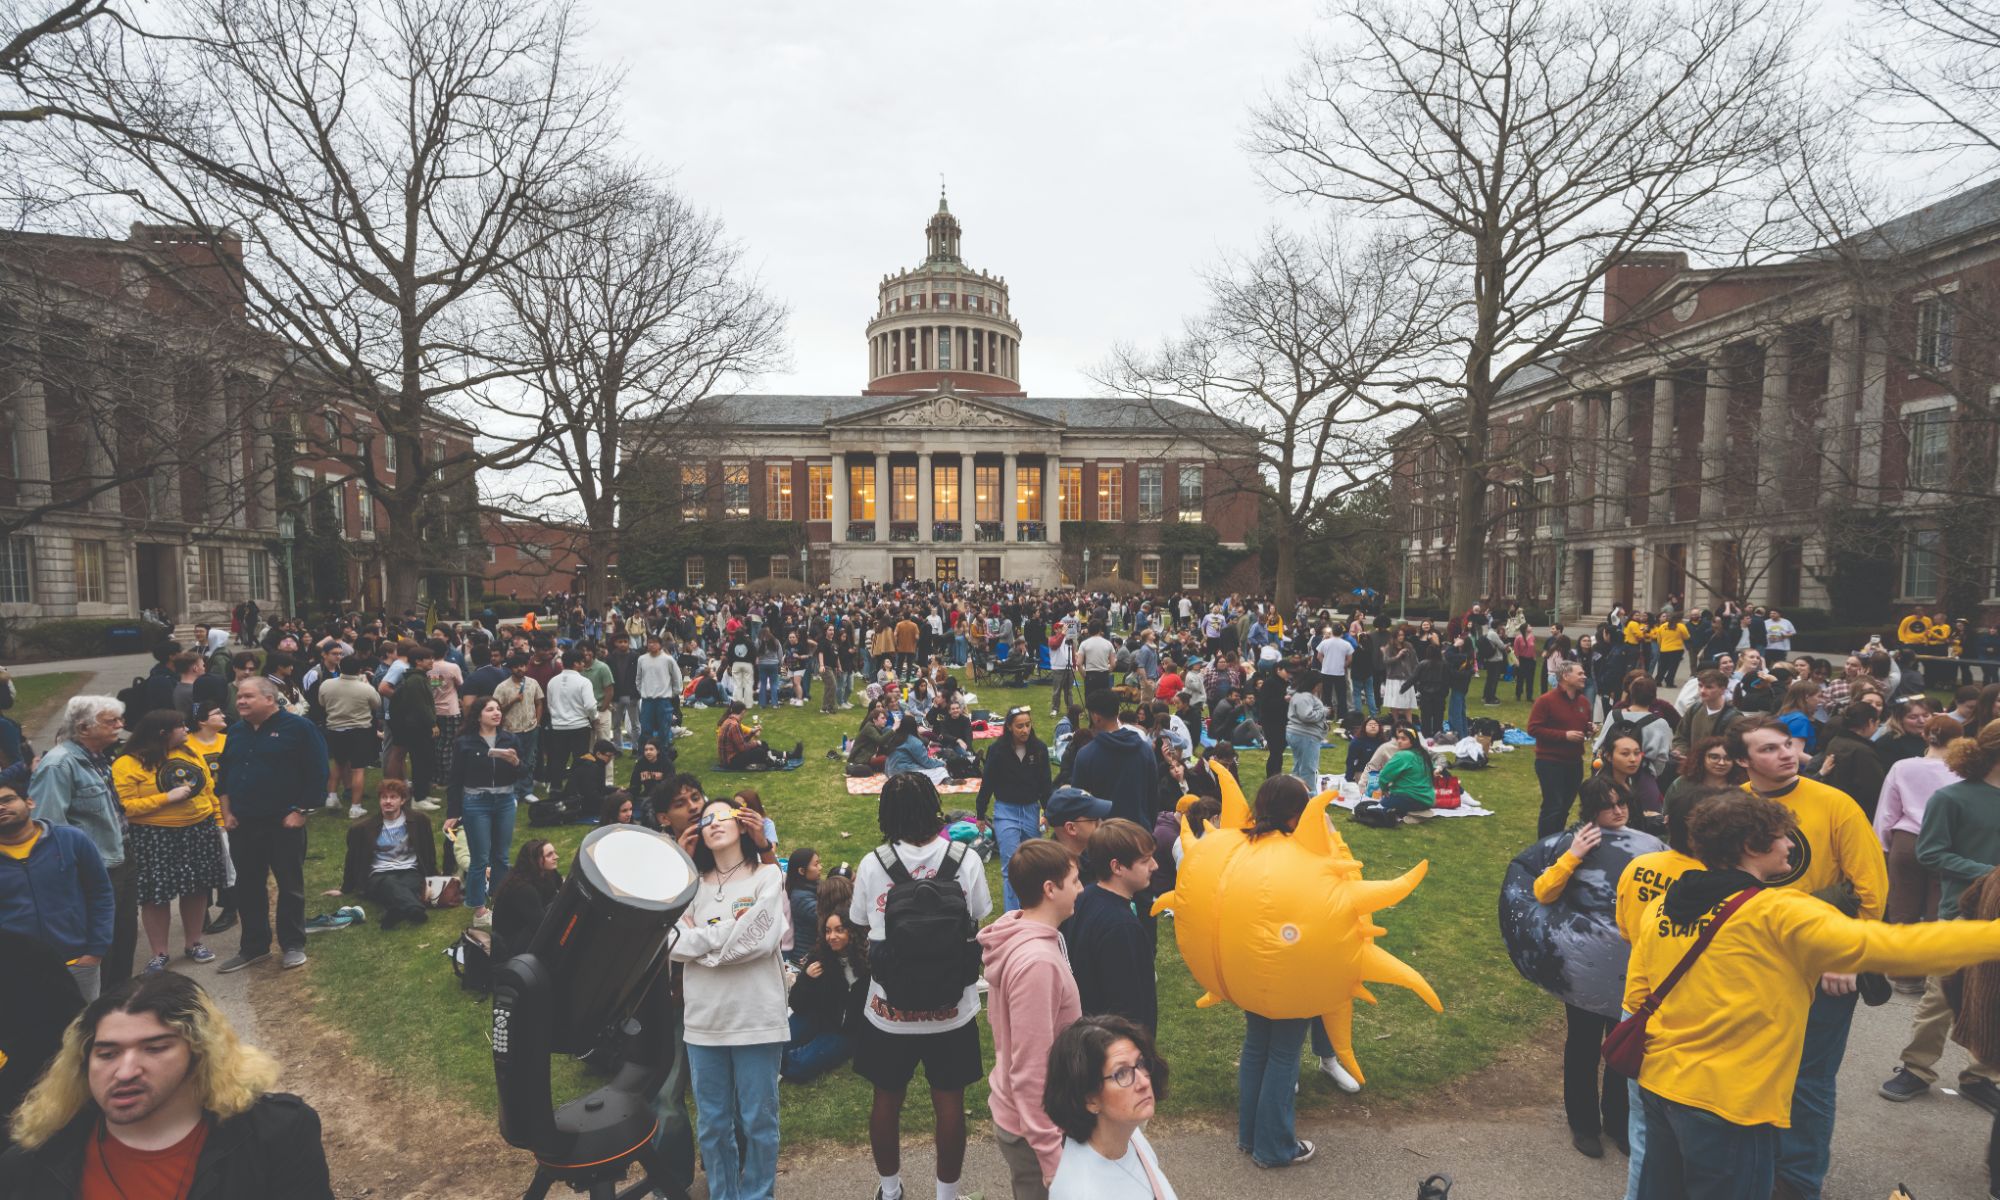 A bustling crowd on a university campus gathers on a green lawn with a large domed building in the background. Many attendees wear yellow, and some carry inflatable suns. There is also a large telescope in the foreground. The scene is lively and energetic.